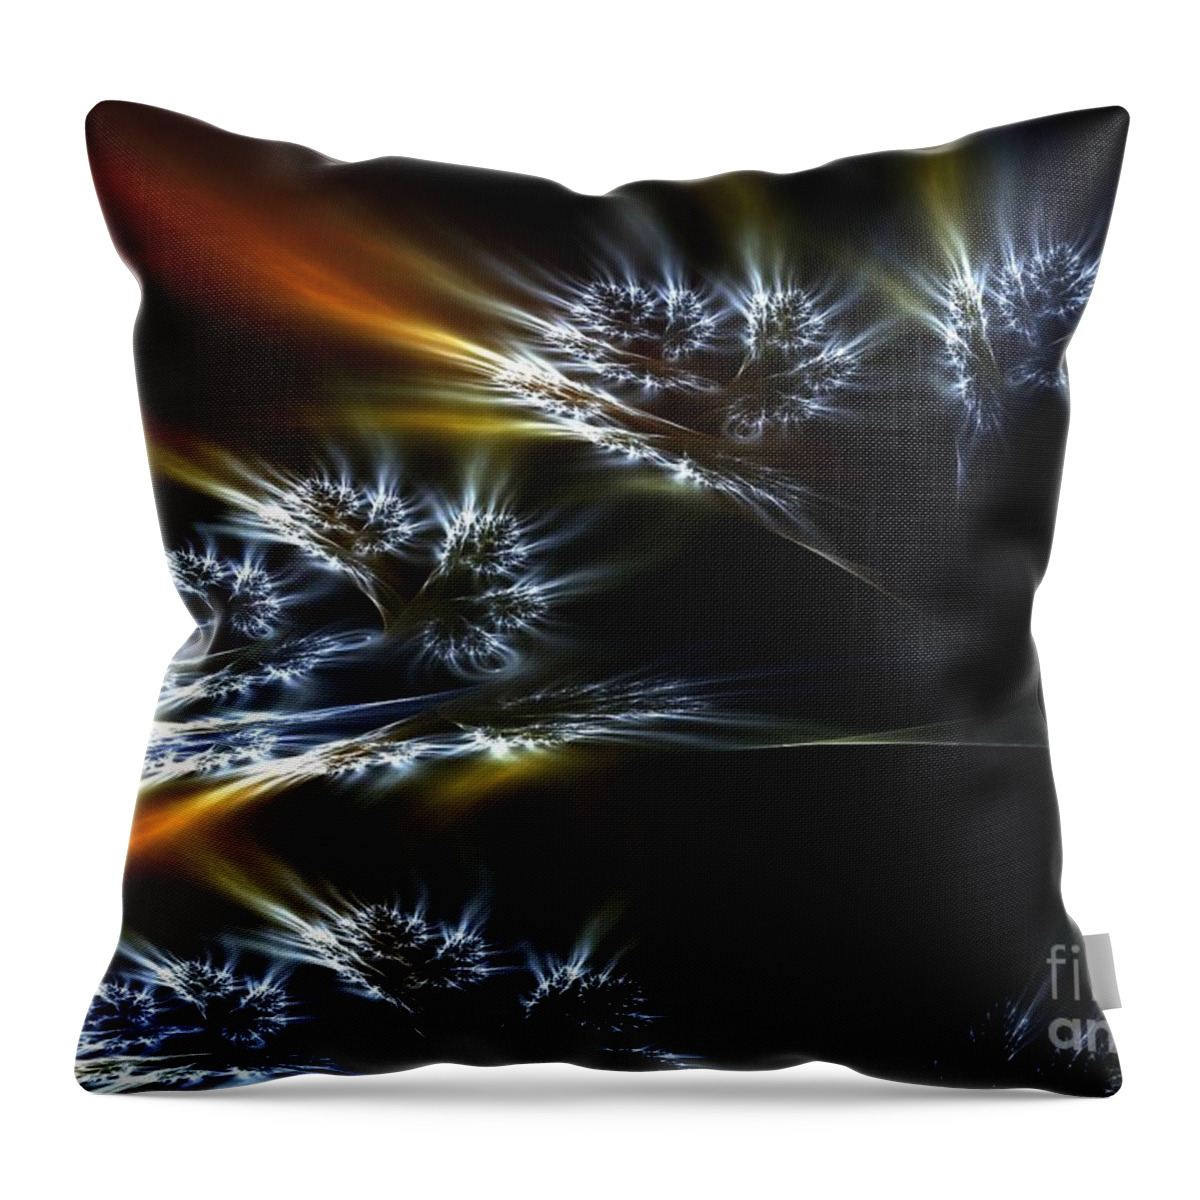 Digital Throw Pillow featuring the digital art Fantacy Lake by Greg Moores